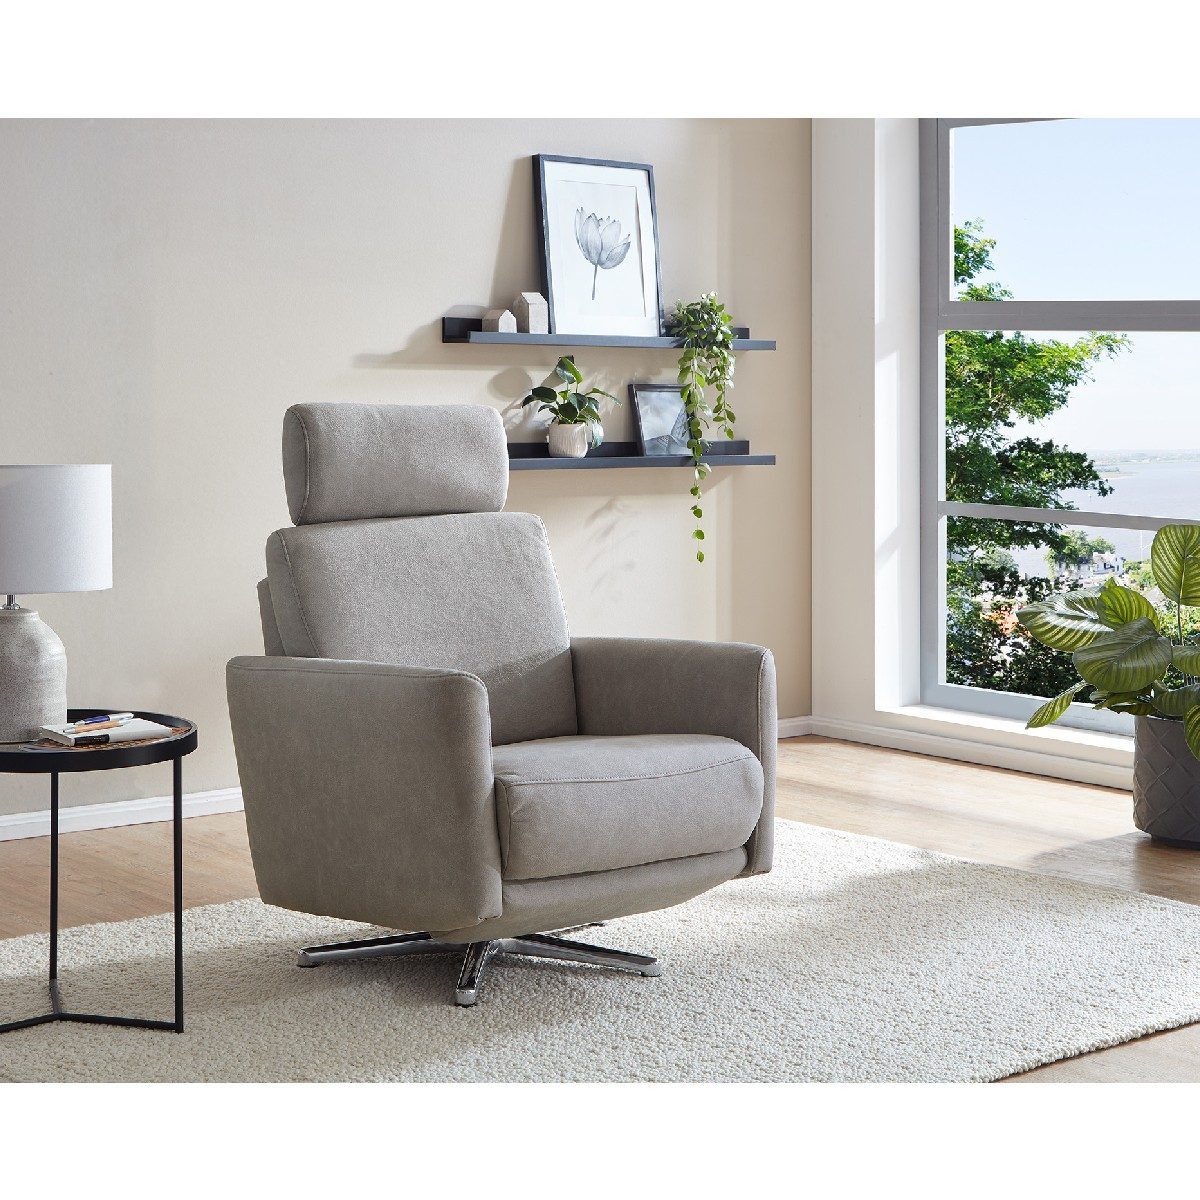 Calizza Interiors Spinell Sessel mit manueller Relaxfunktion 